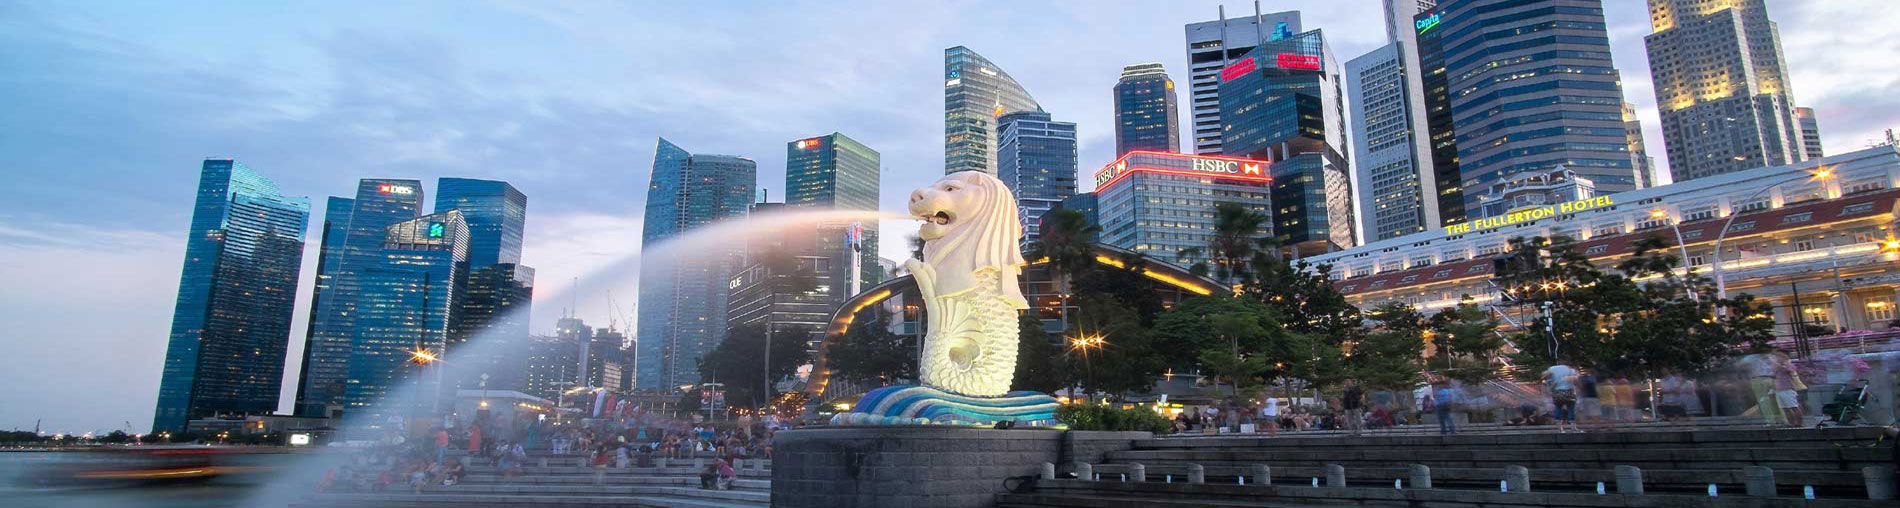 Singapore, Malaysia & Thailand Tour Package from India